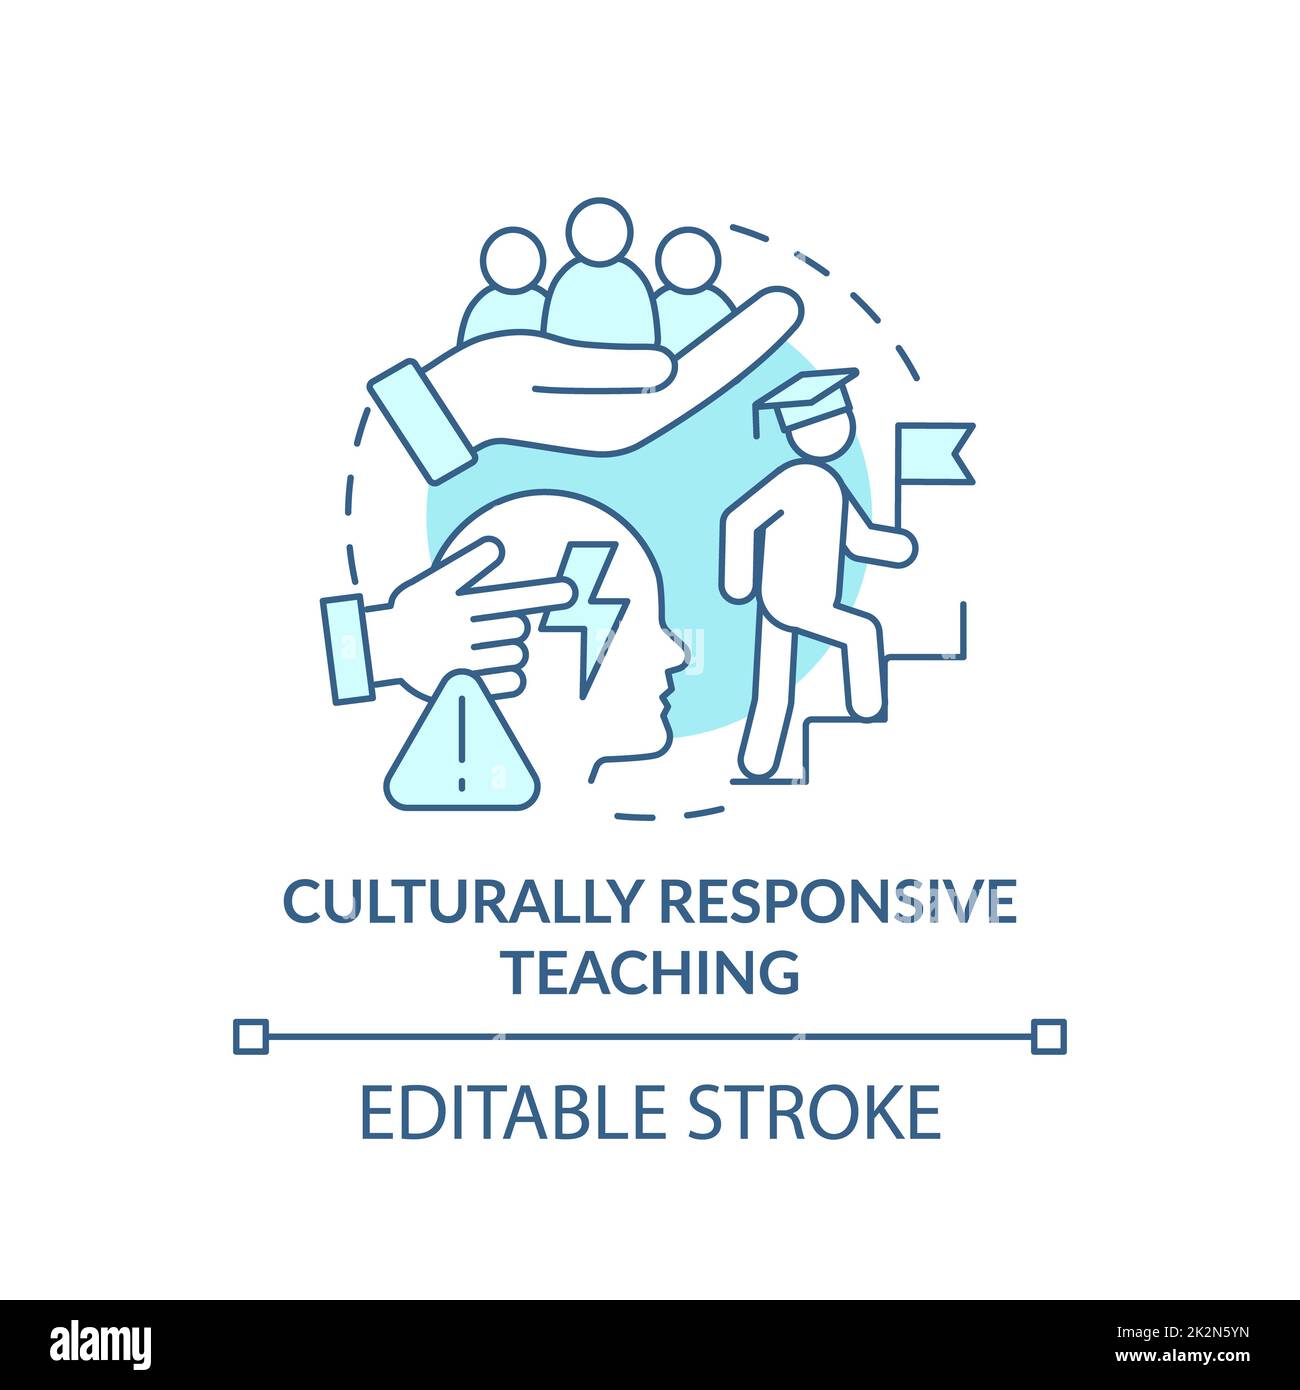 Culturally responsive teaching turquoise concept icon Stock Photo